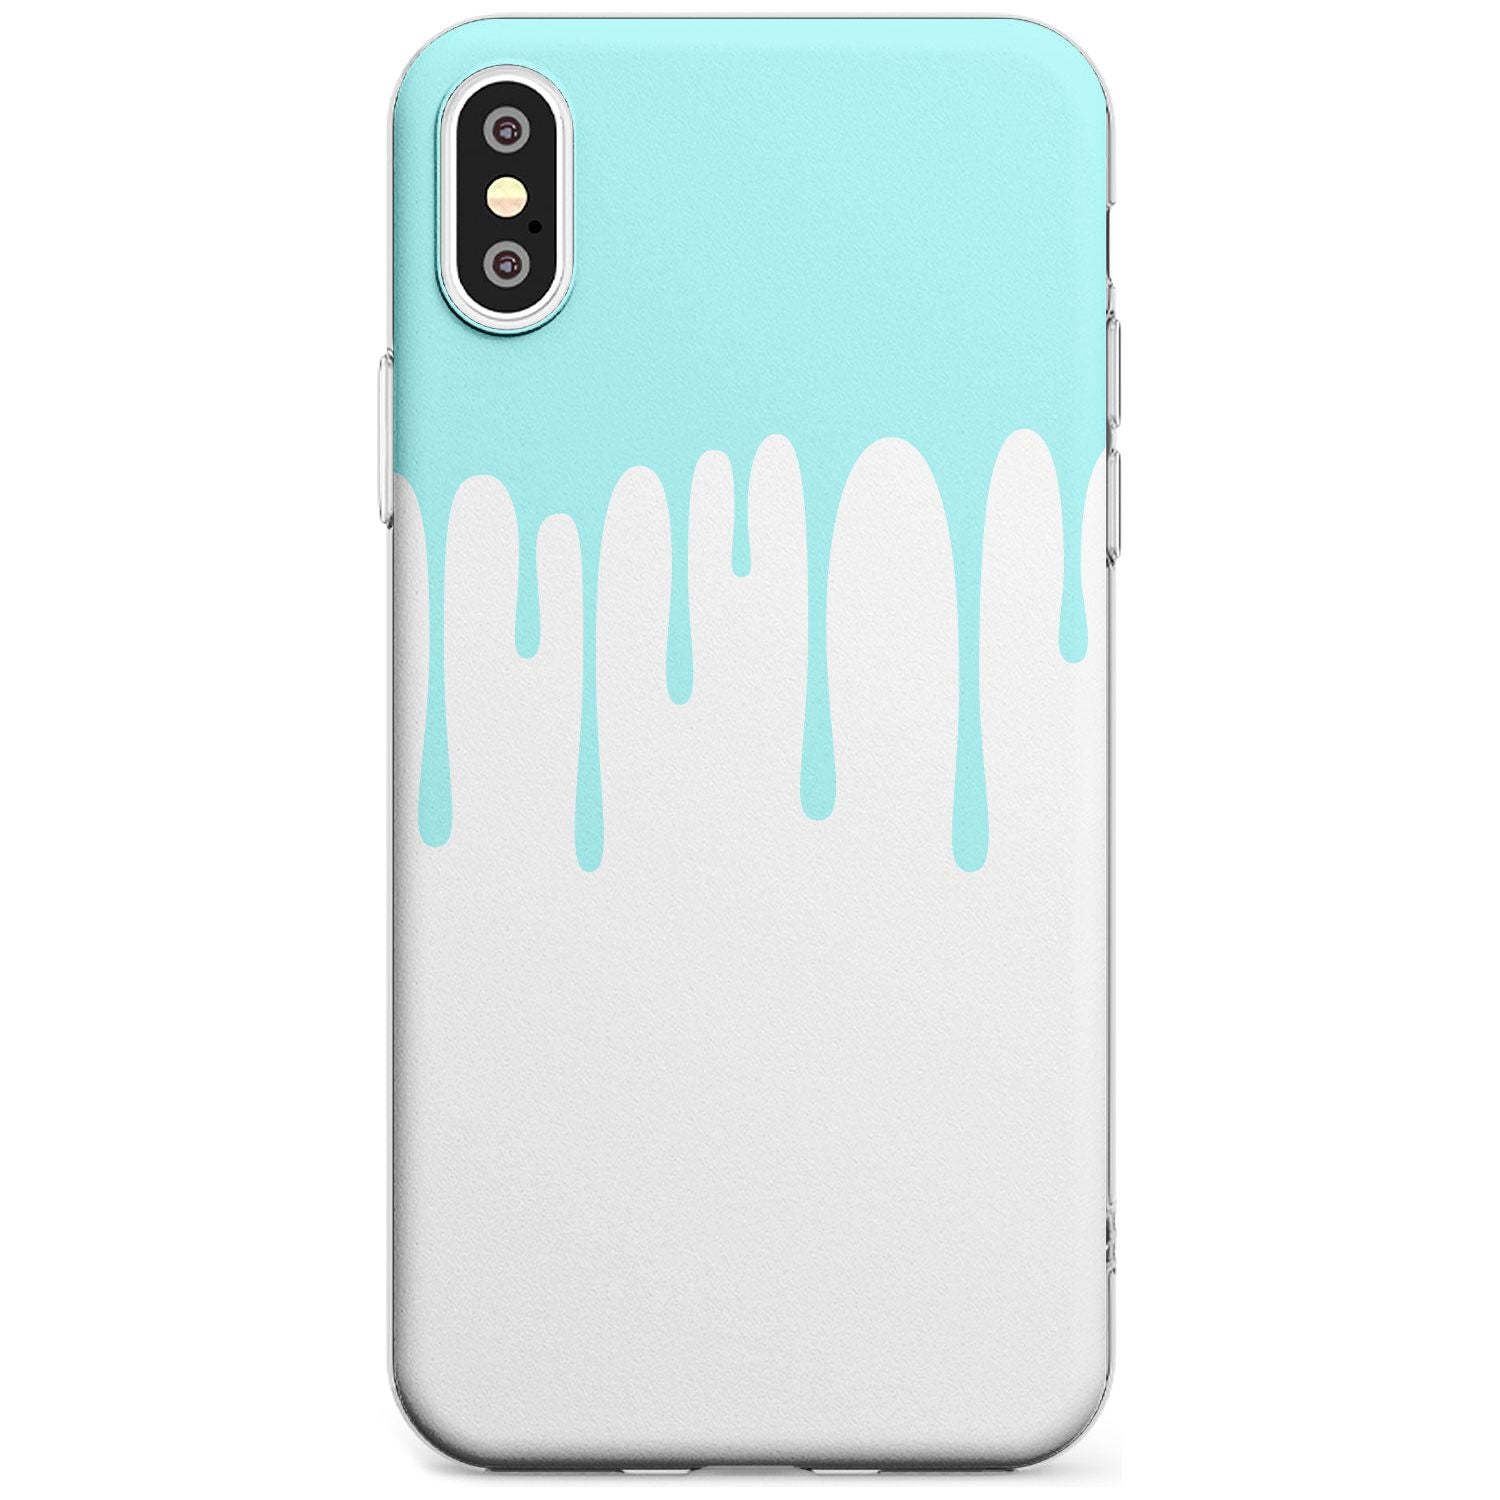 Melted Effect: Teal & White iPhone Case Slim TPU Phone Case Warehouse X XS Max XR